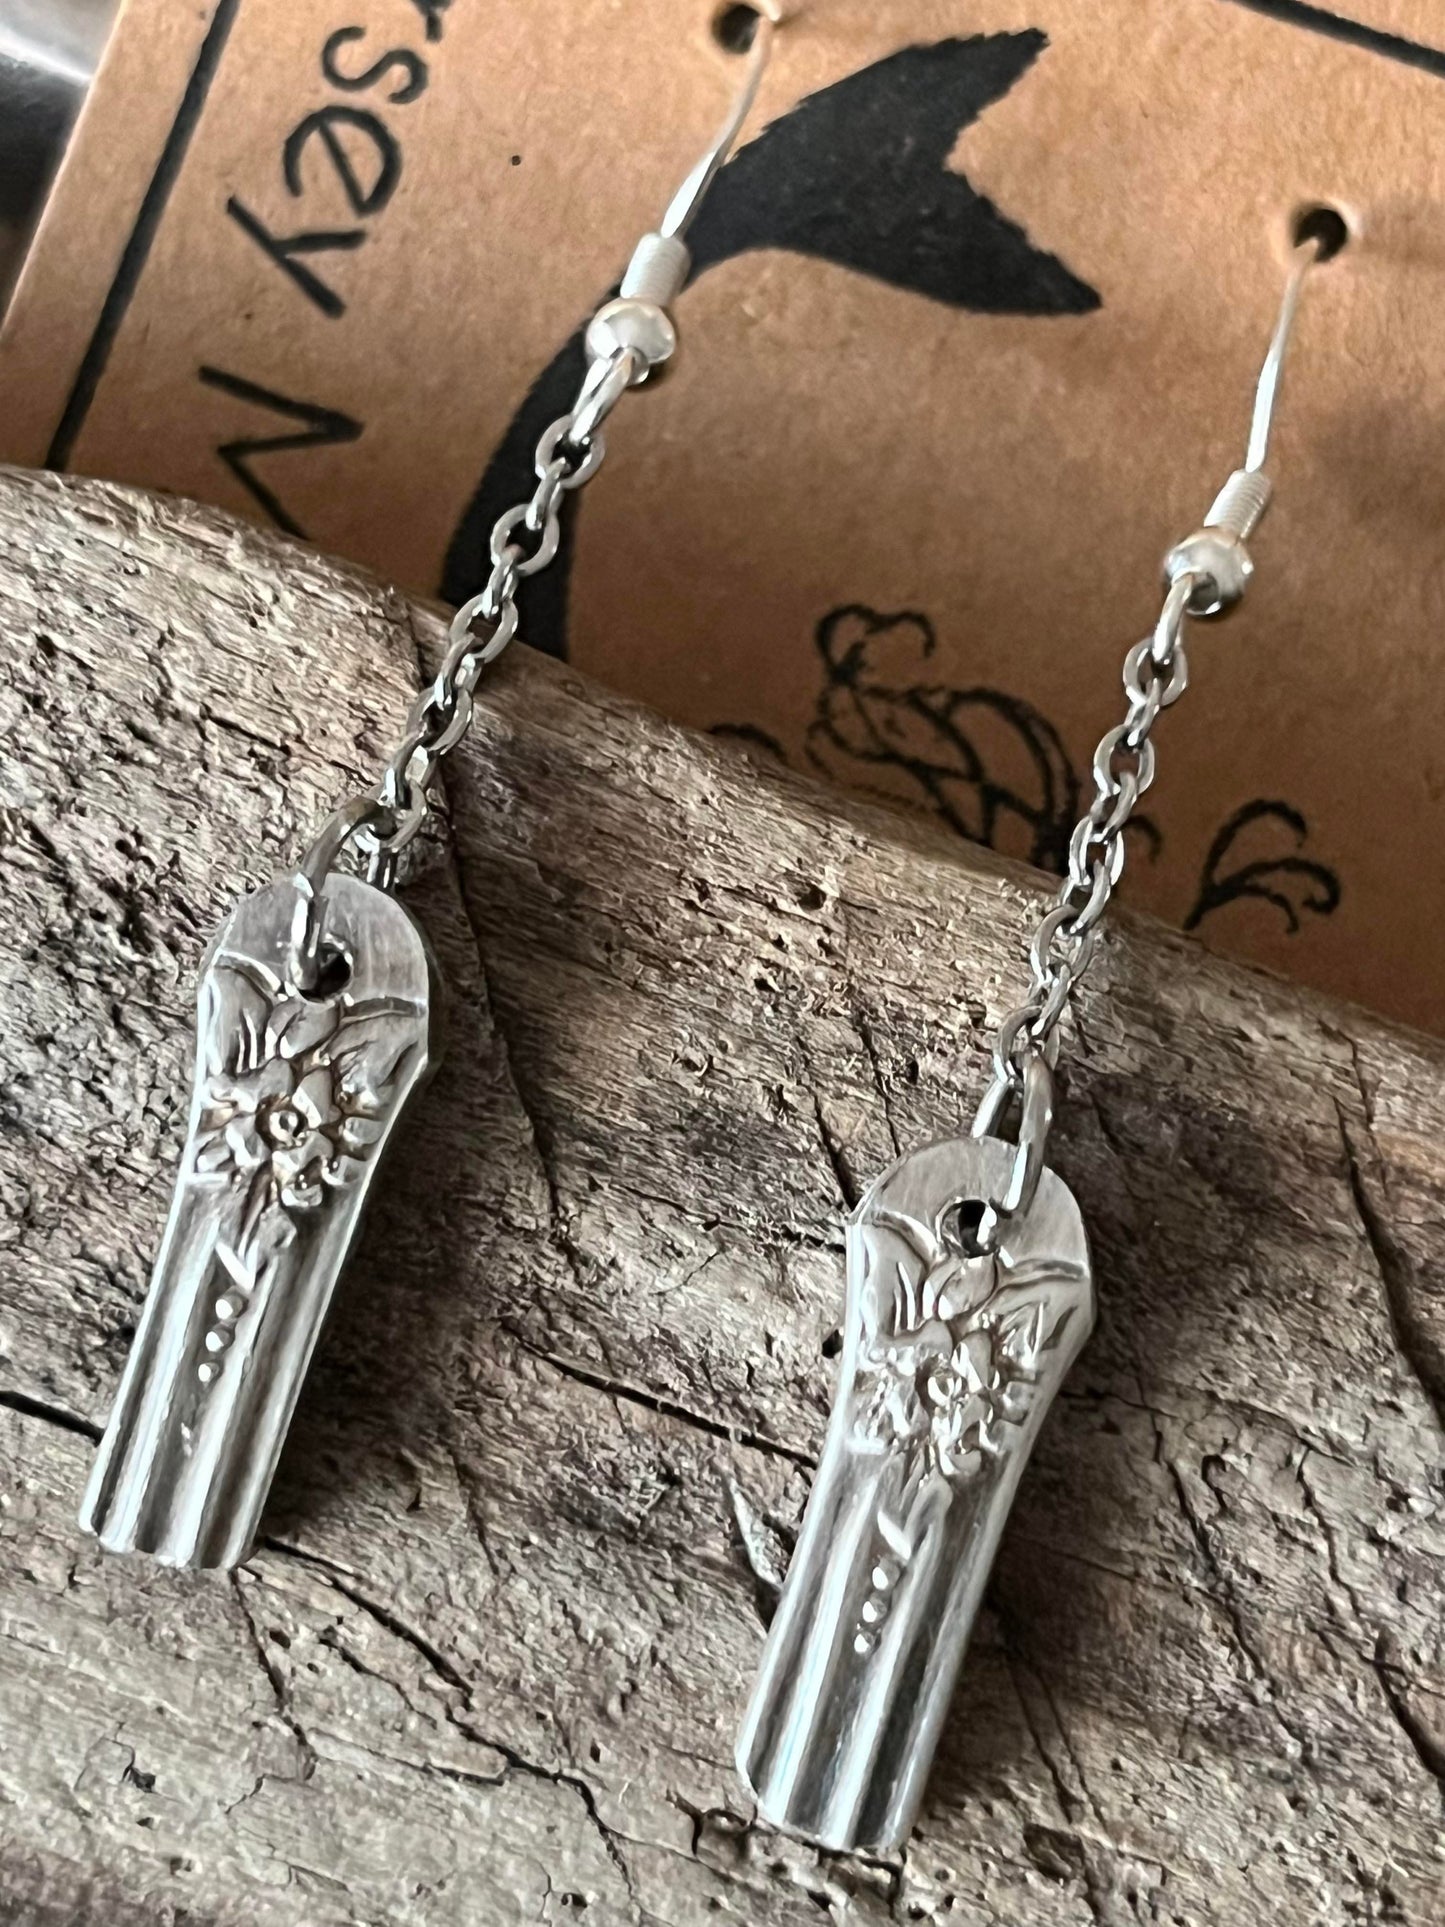 Earrings :  silverware on a stainless chain